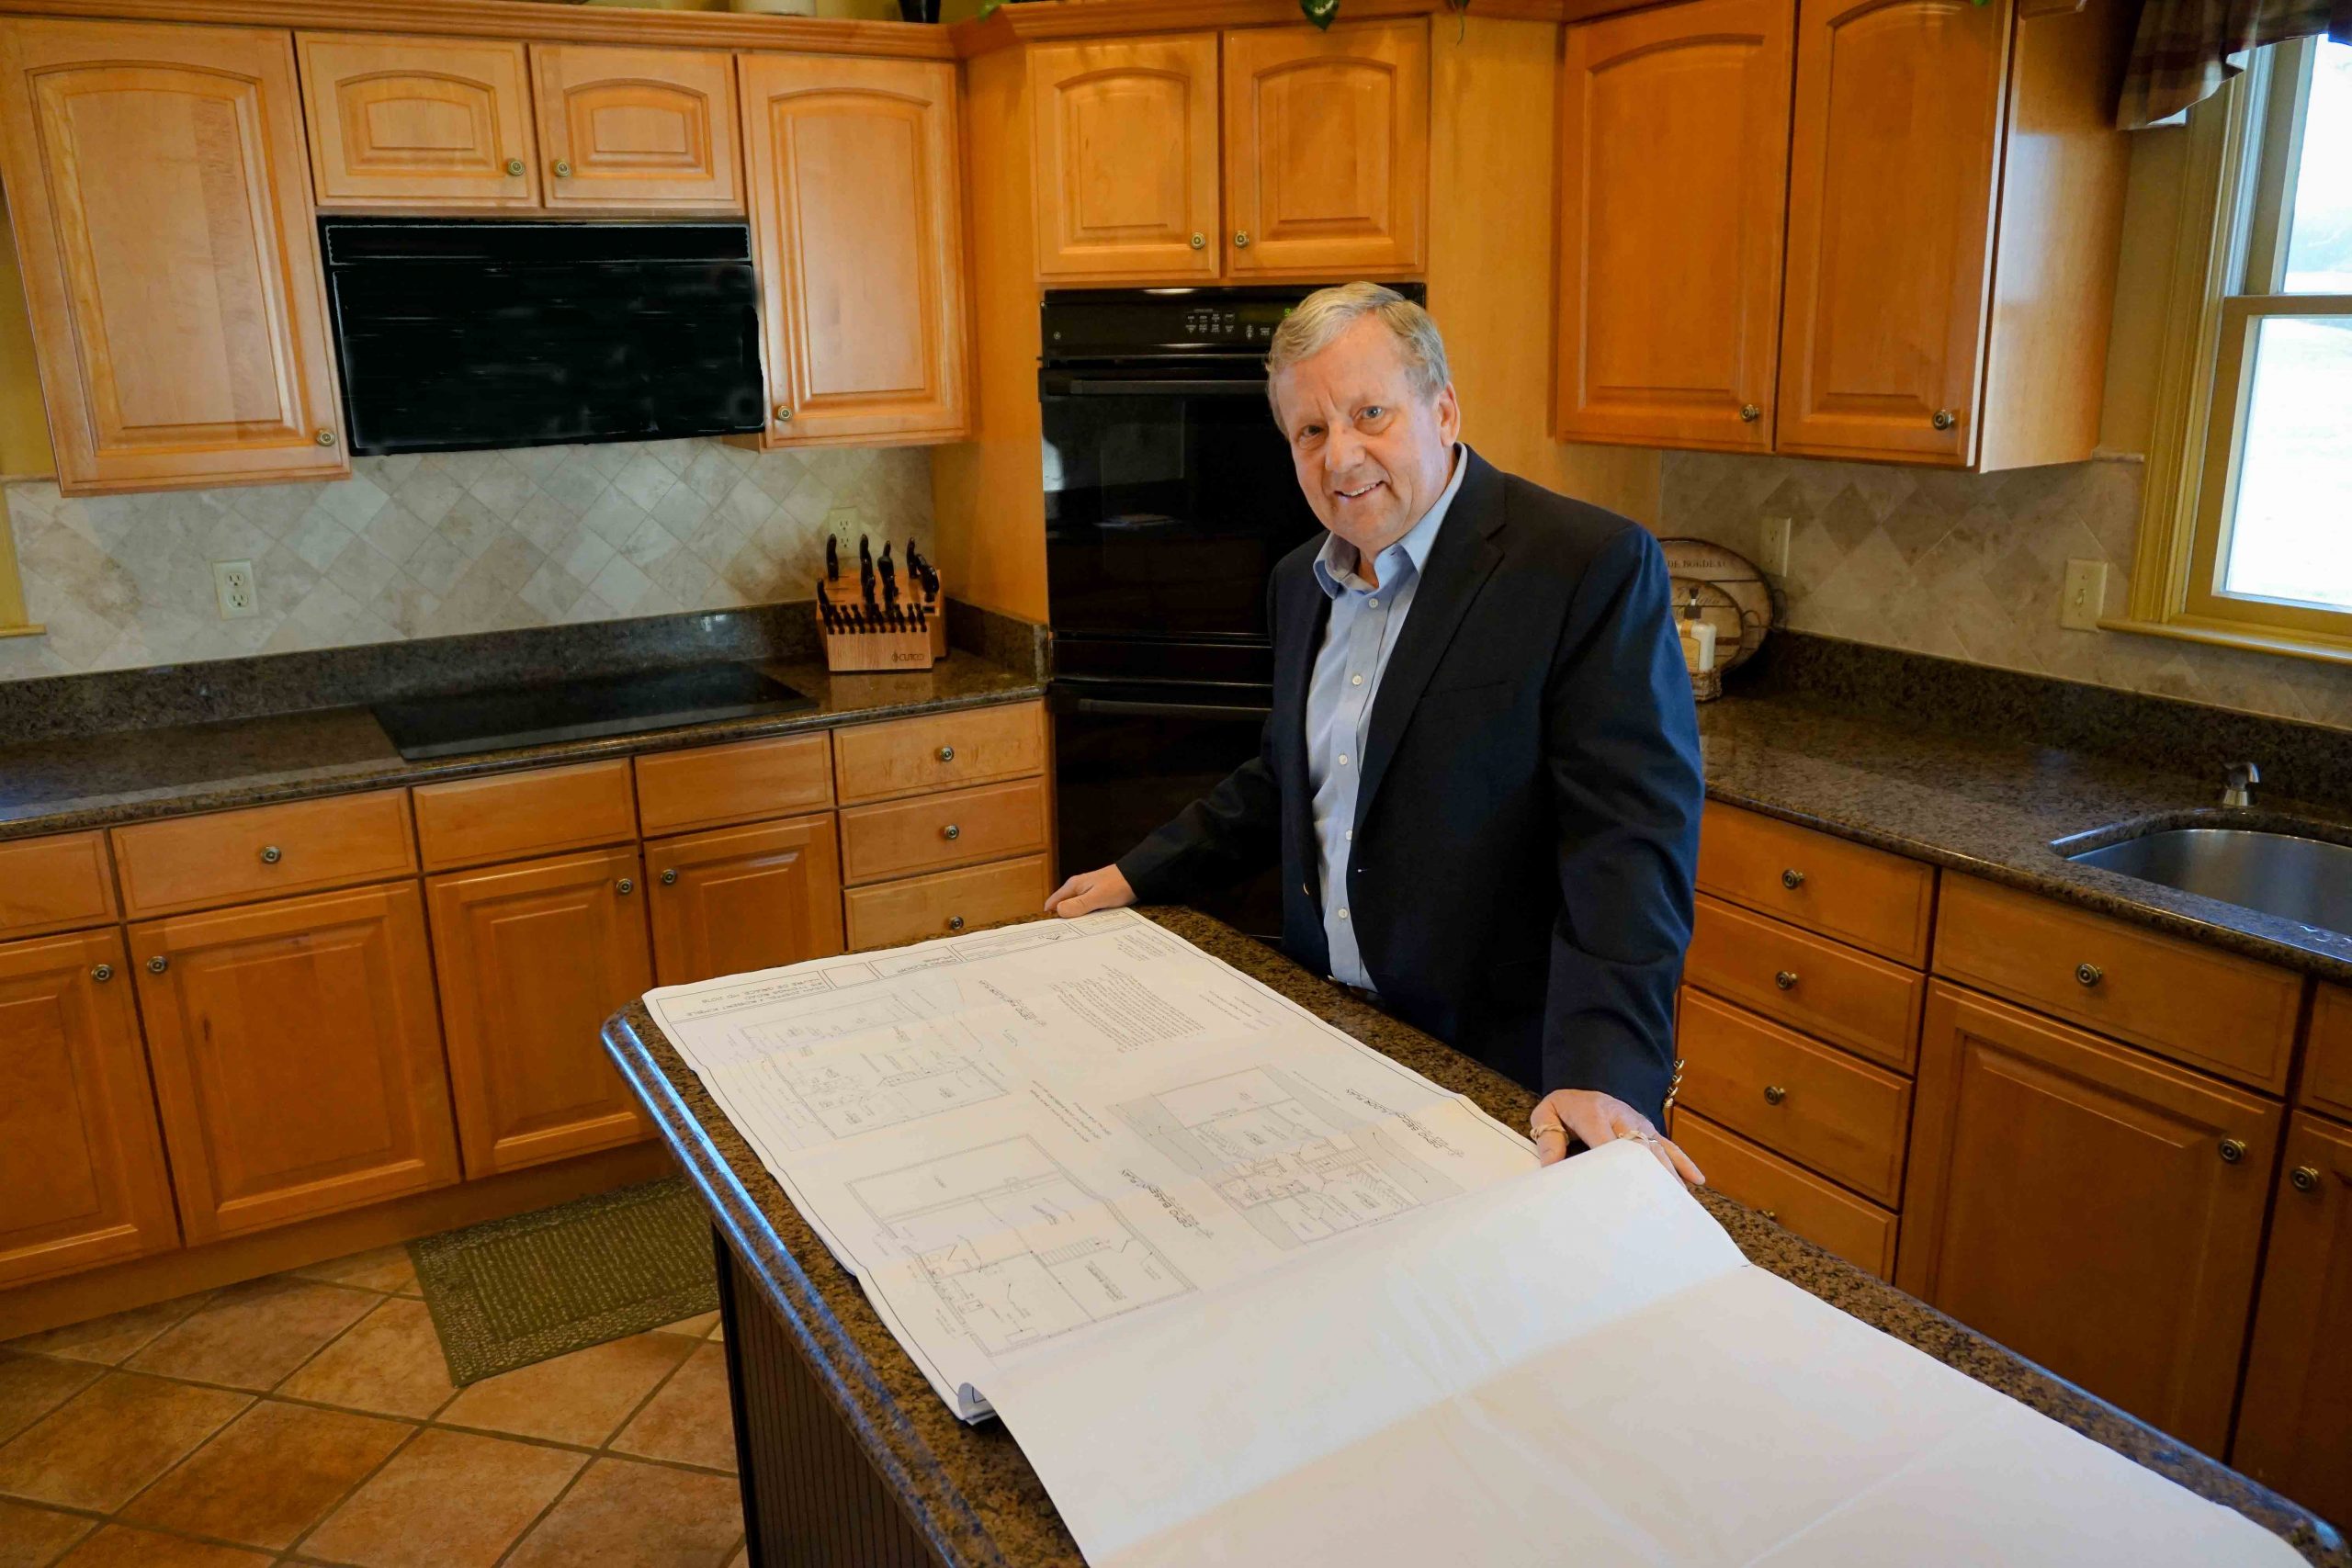 image of donald lynch jr in a kitchen with house layout plans